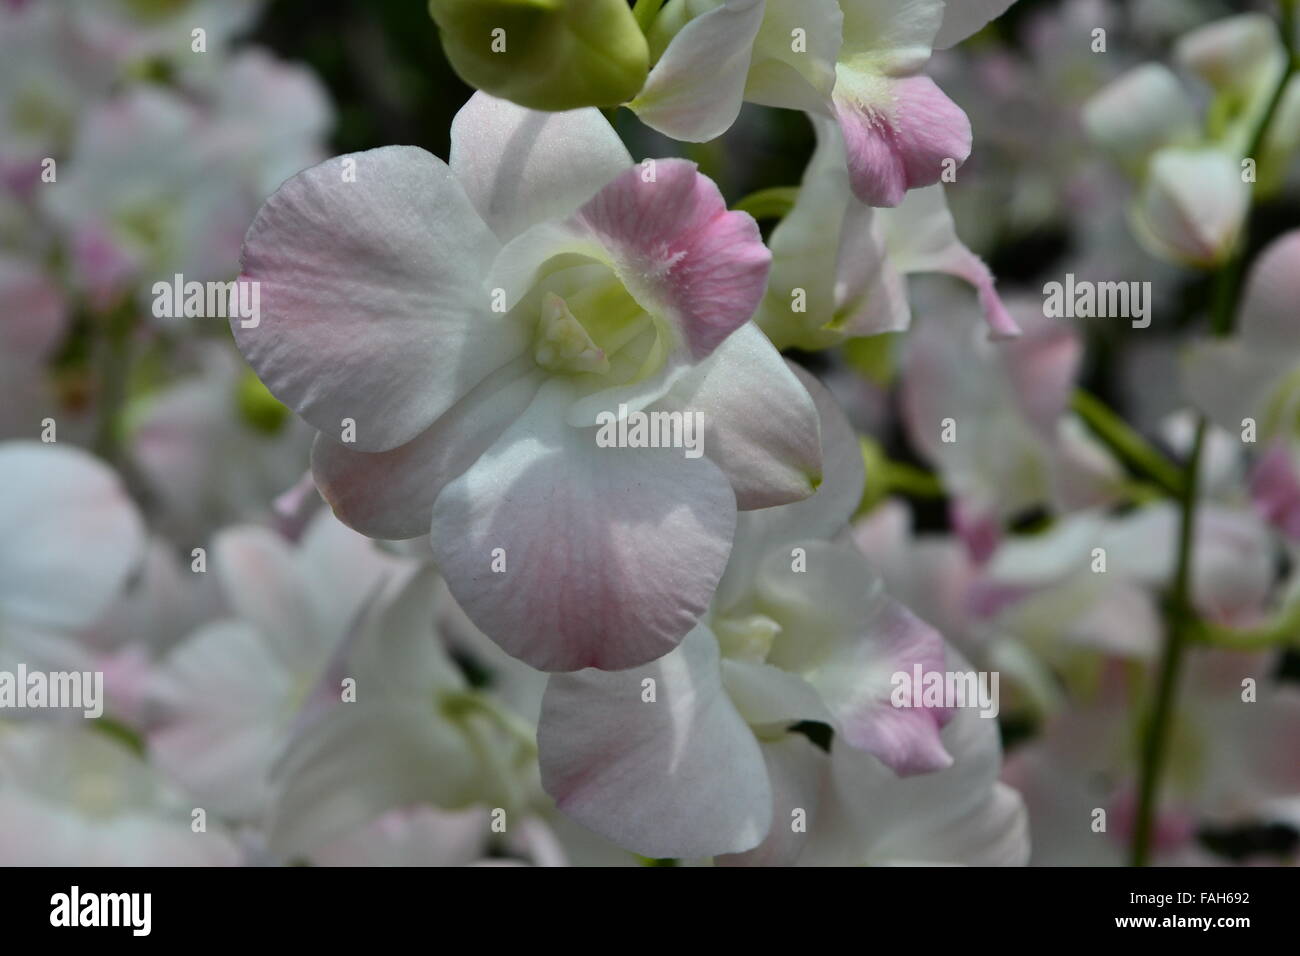 White pink orchids on branches Stock Photo